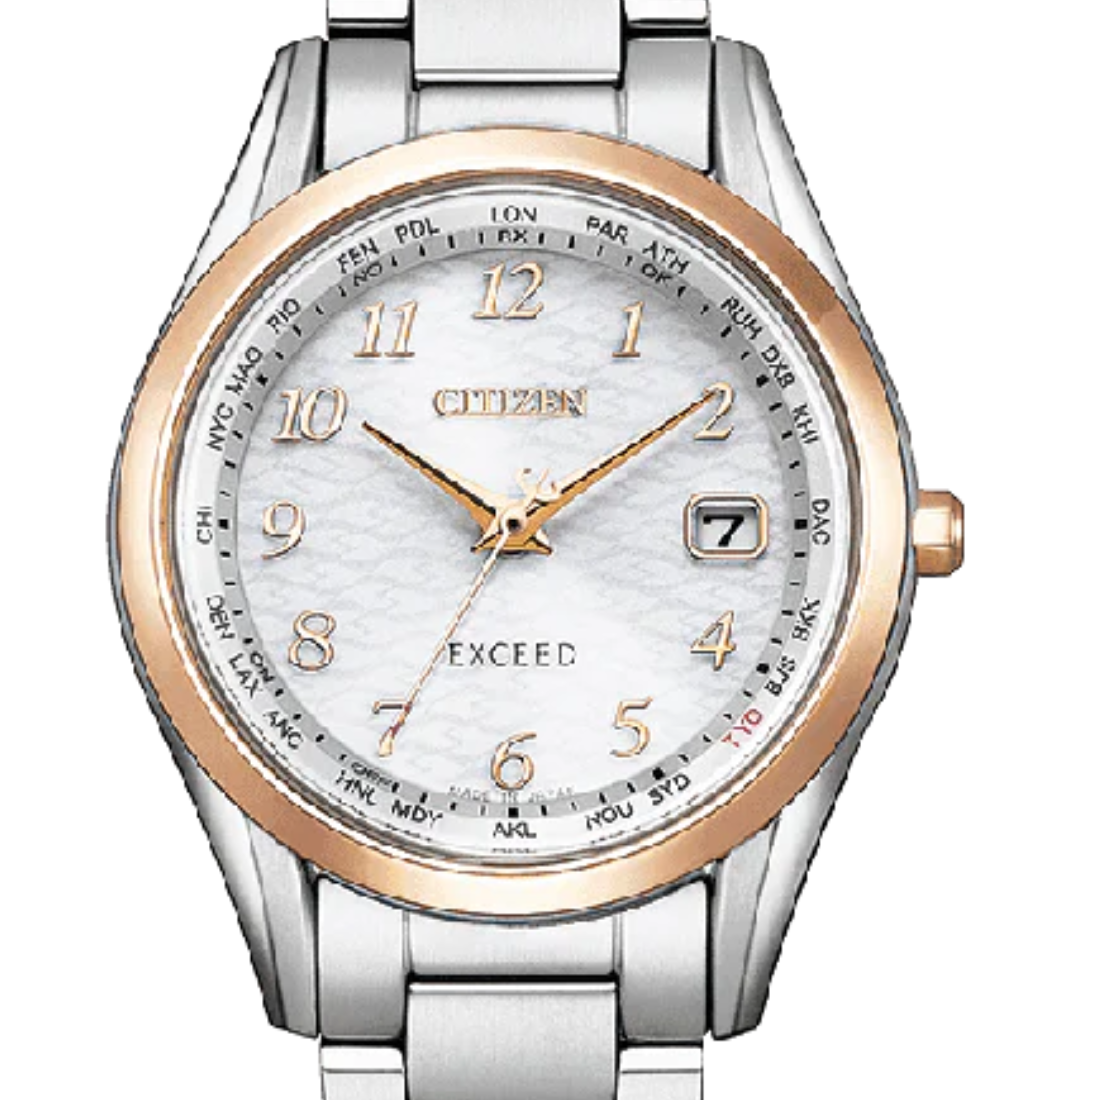 Citizen ES9375-51A Exceed Eco-Drive Limited Edition Ladies Watch (PRE-ORDER)